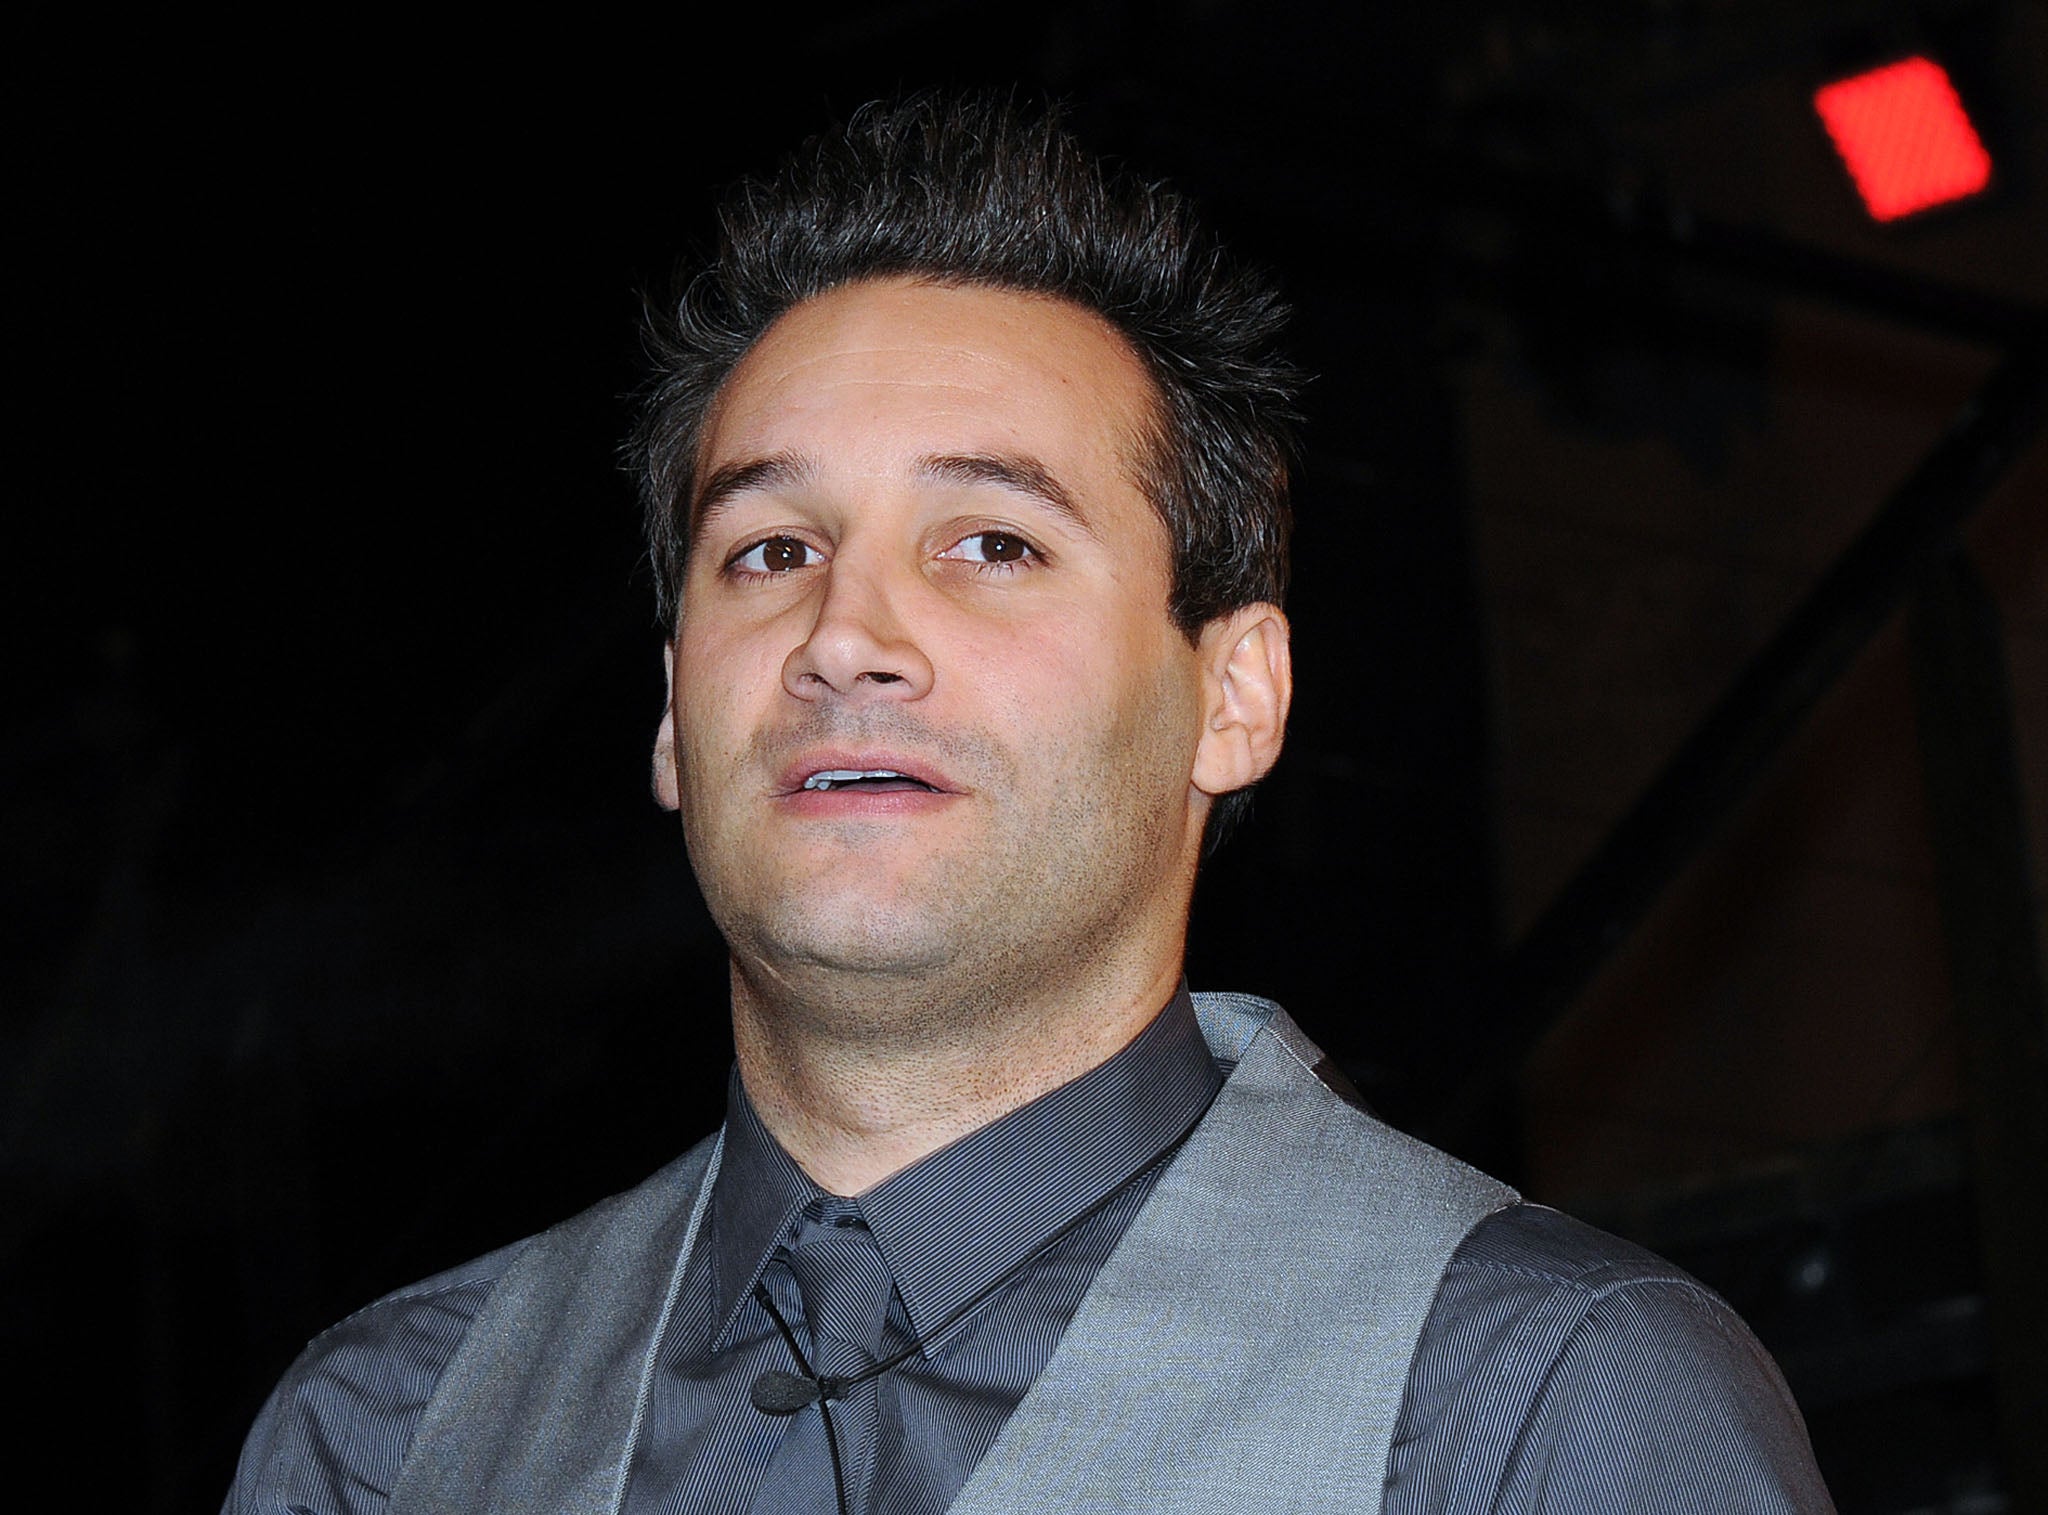 Dane Bowers is engaged to Sophia Cahill